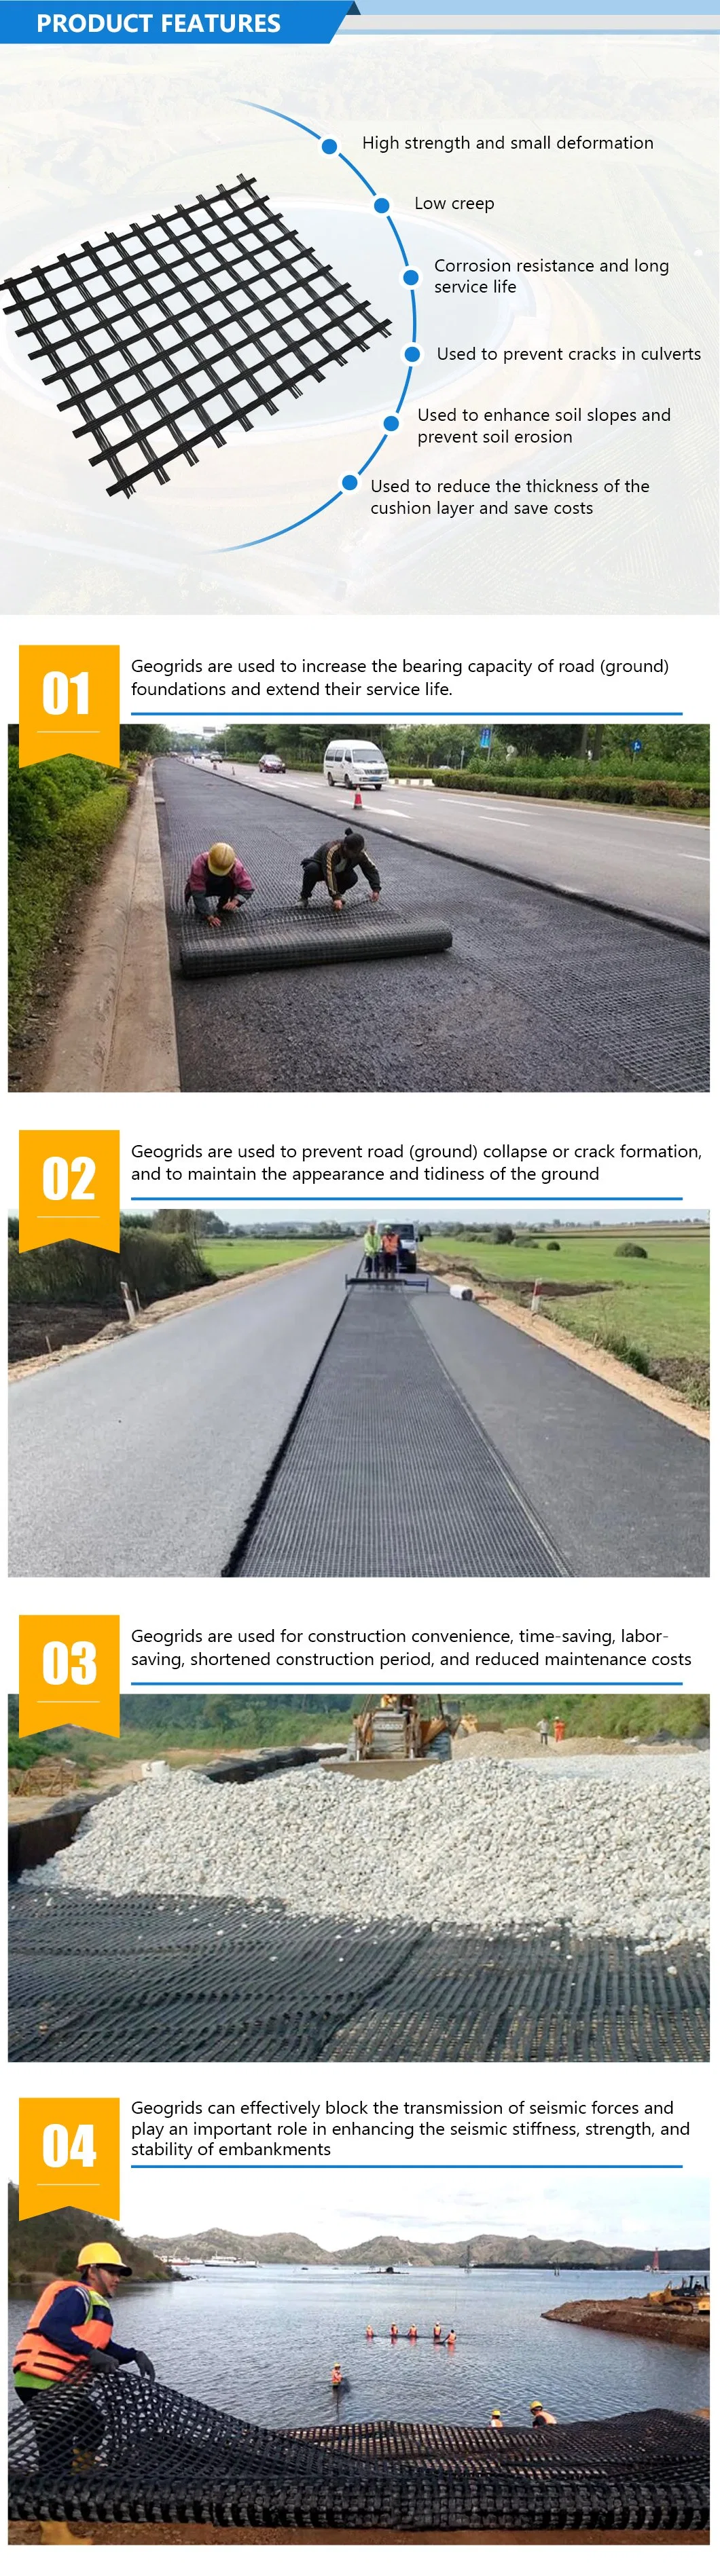 Customzied 25kn PP Plastic Uniaxial Geogrid Manufacturer for Dam and Roadbed/Slope Protection/Wall Reinforcement/Roadbed Bearing Capacity Improvement in Airfiel